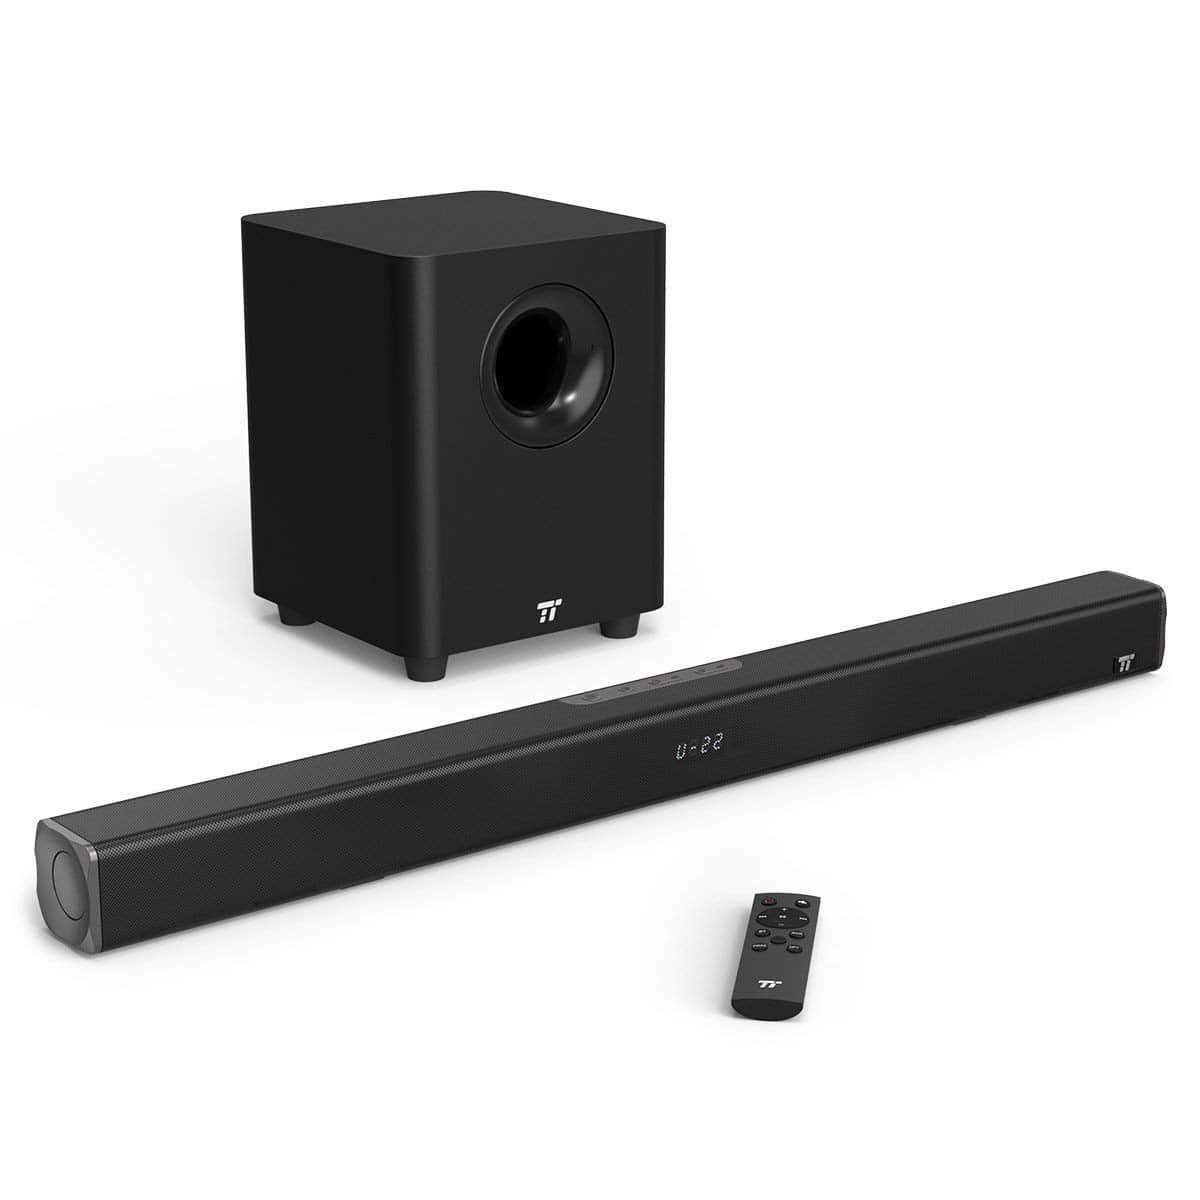 Top 10 Best Sound Bars with BuiltIn Subwoofer in 2022